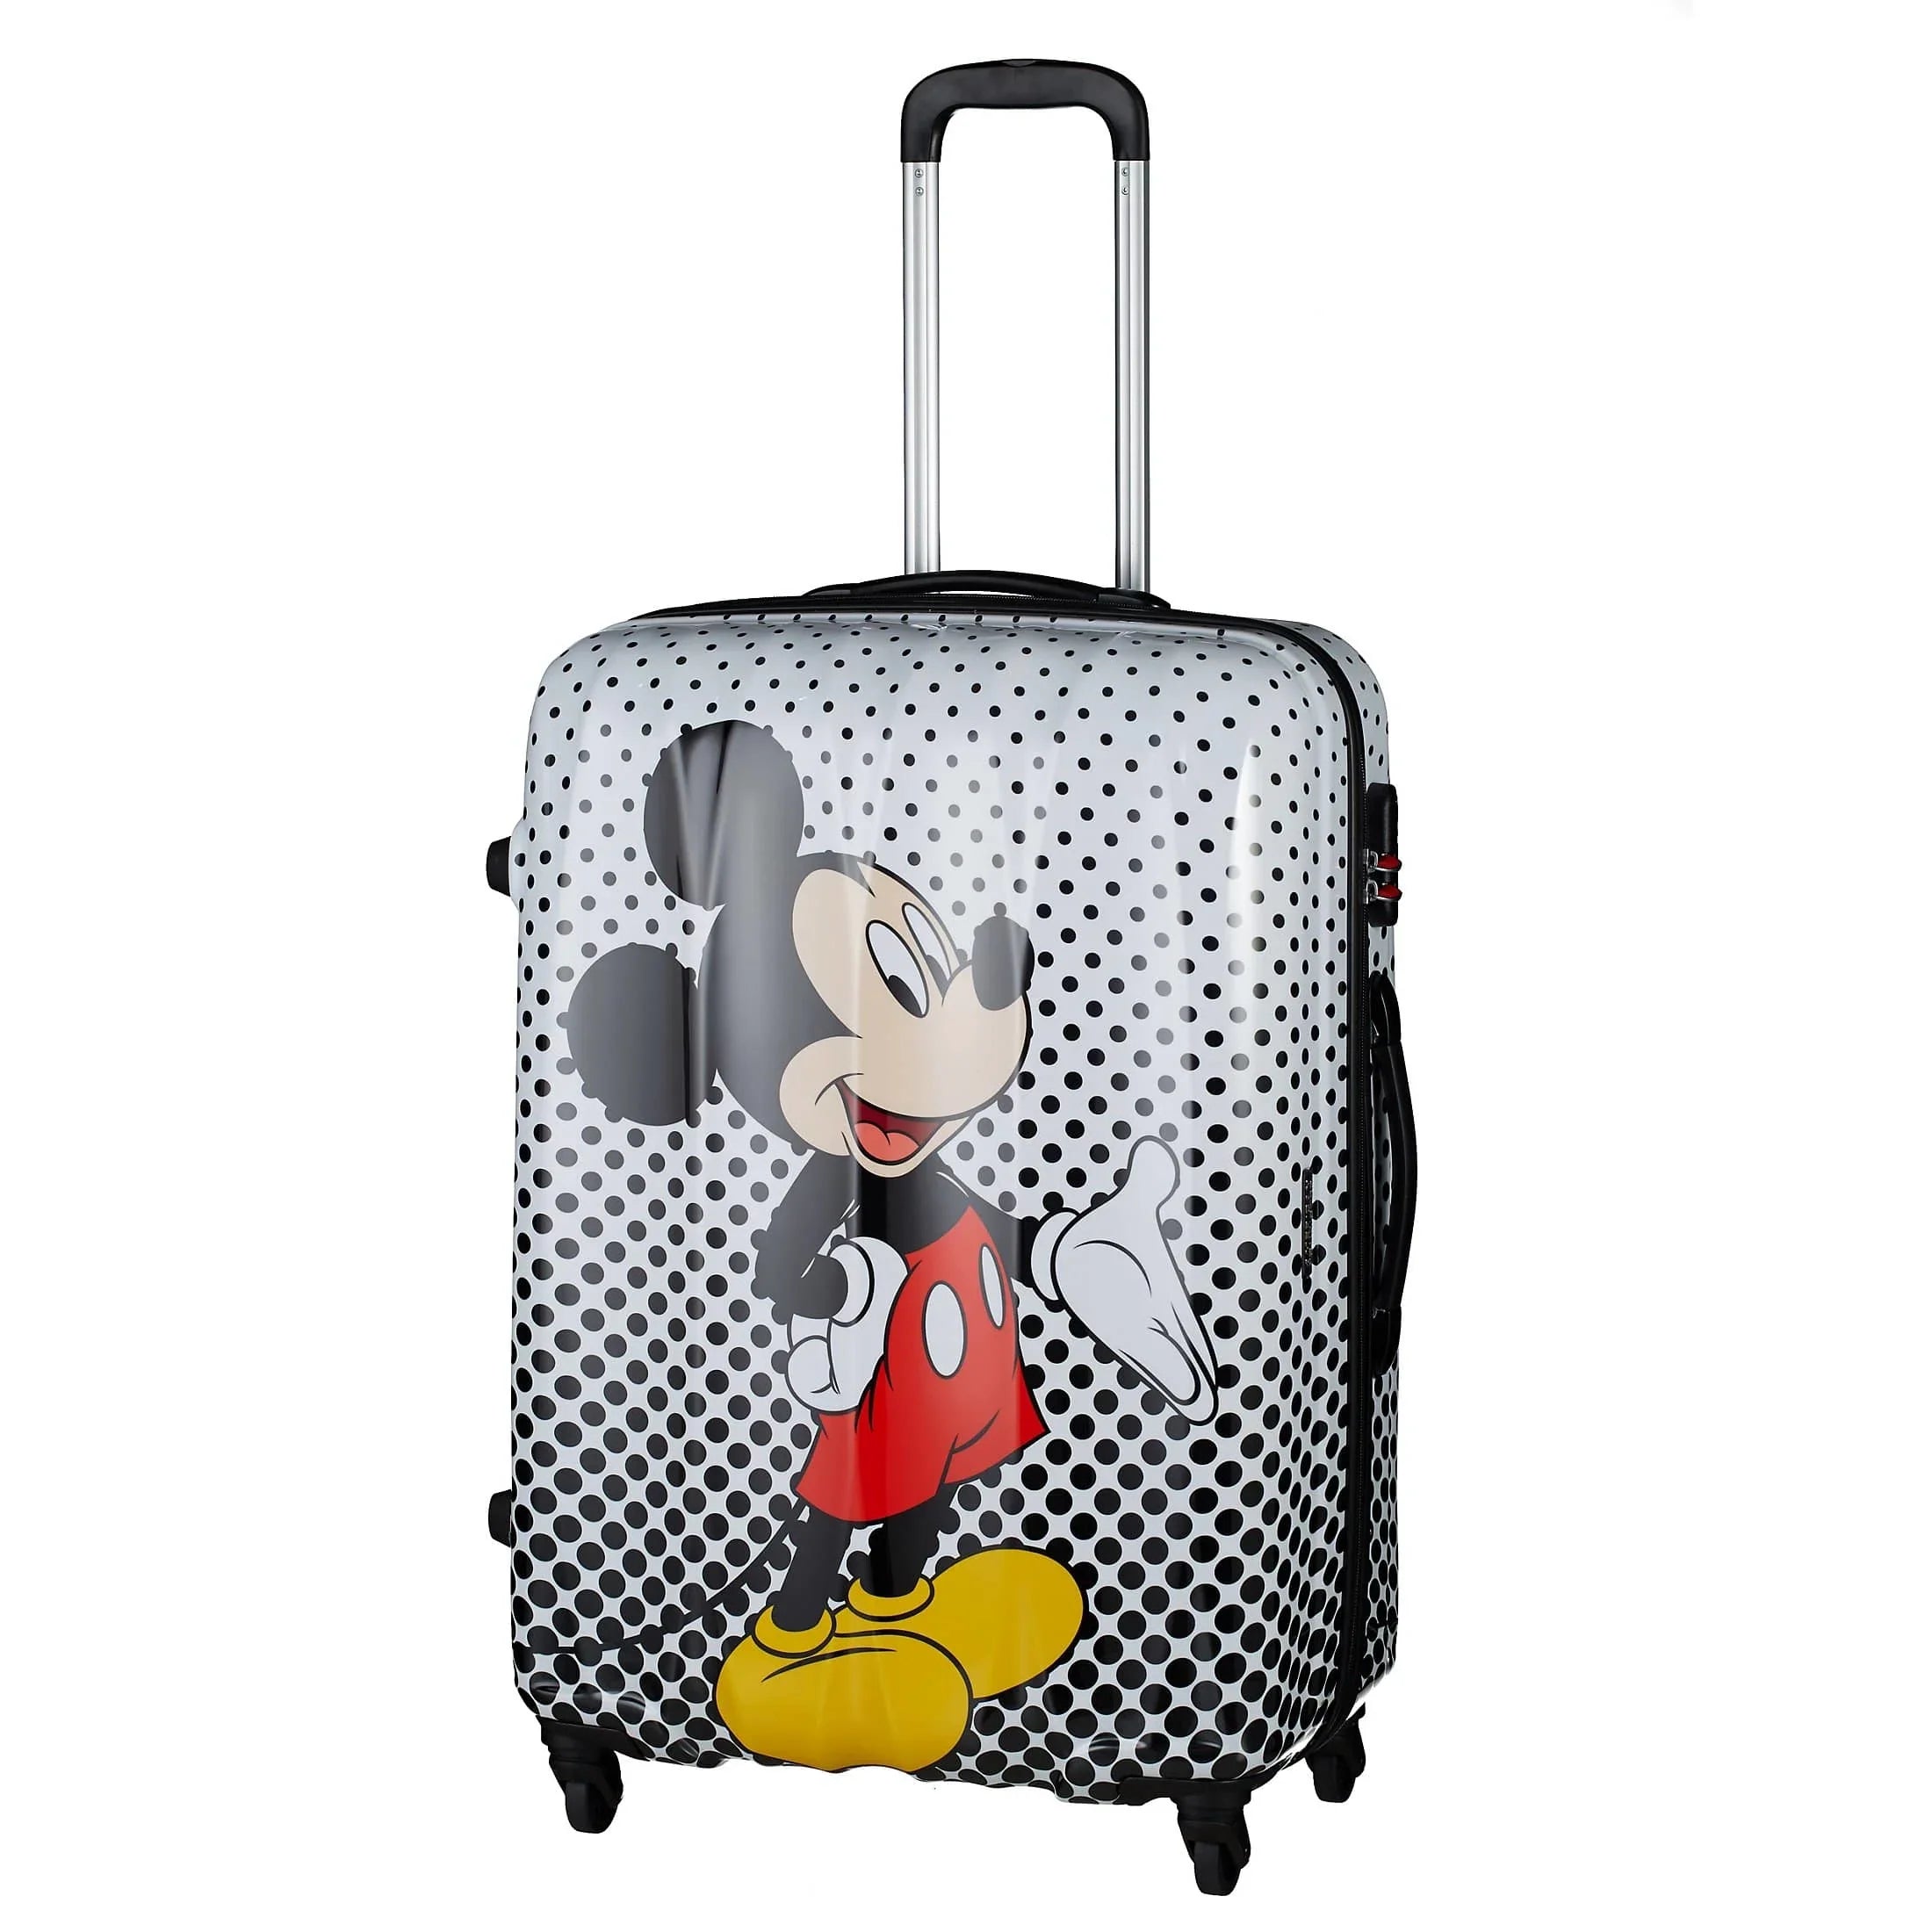 American Tourister Disney Legends trolley 4 roues 64 cm - Mickey Mouse à pois